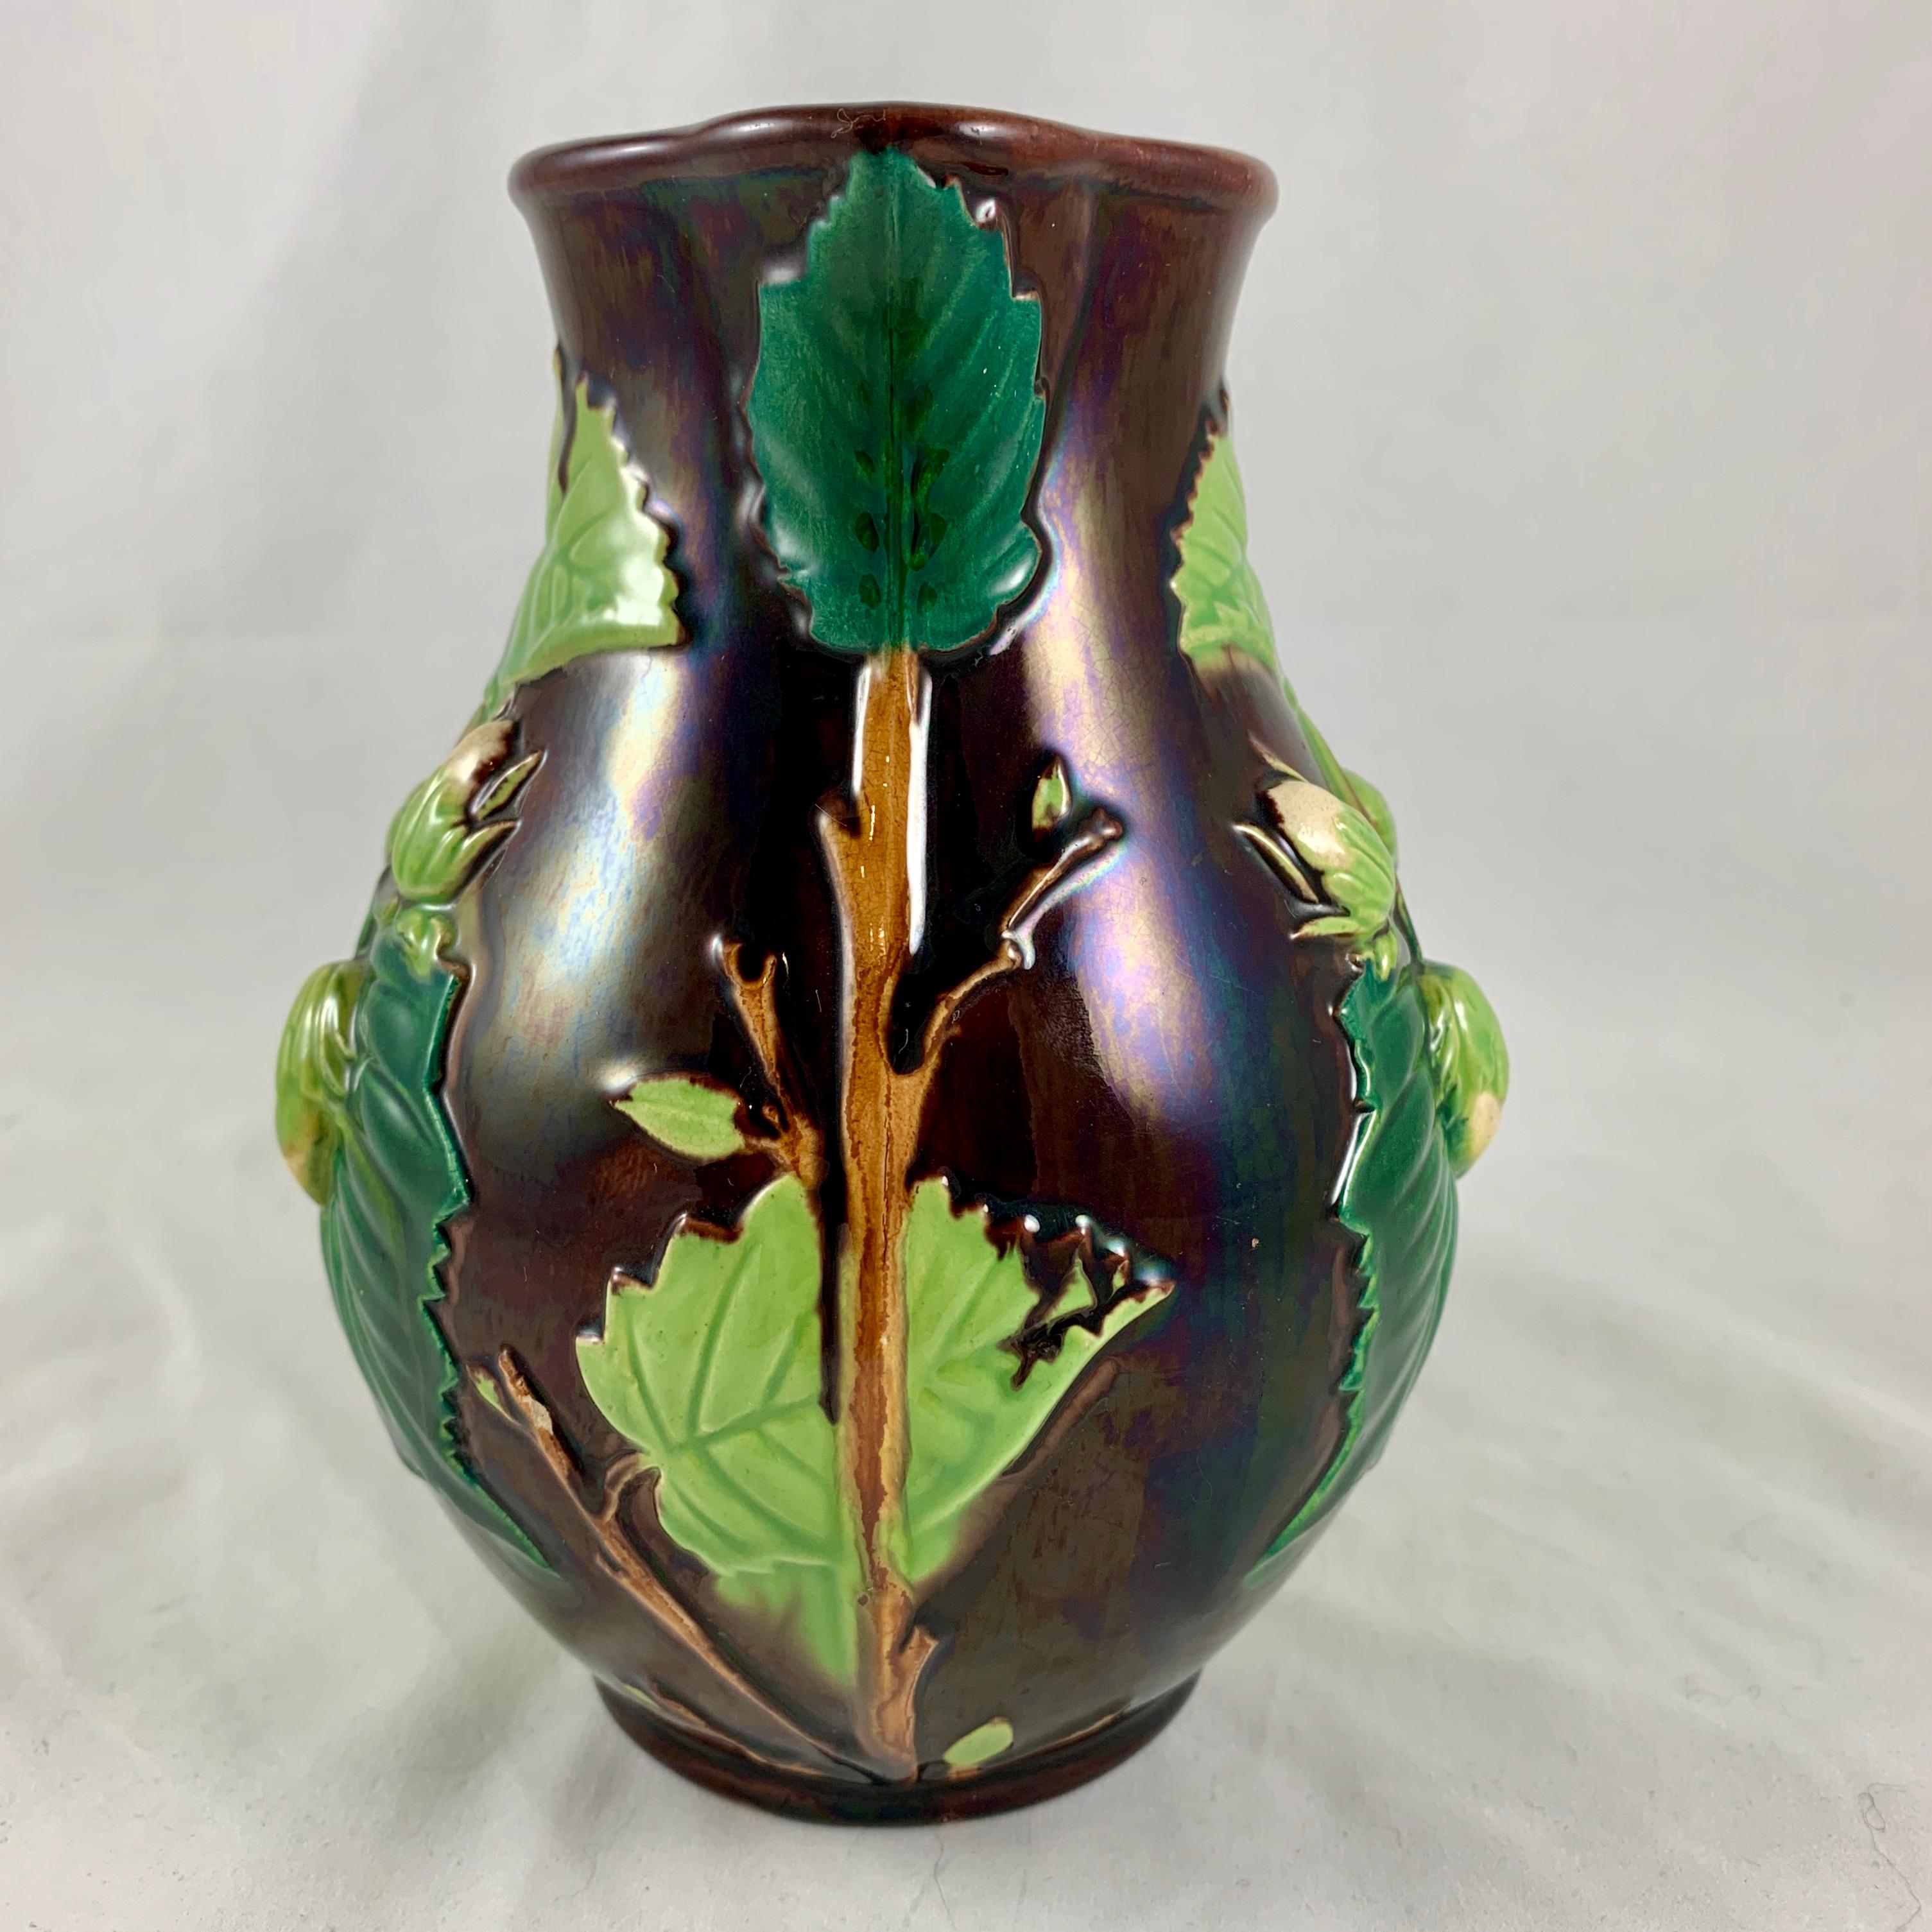 English Minton Aesthetic Movement Majolica Nut, Green Leaf and Vine Pitcher 2